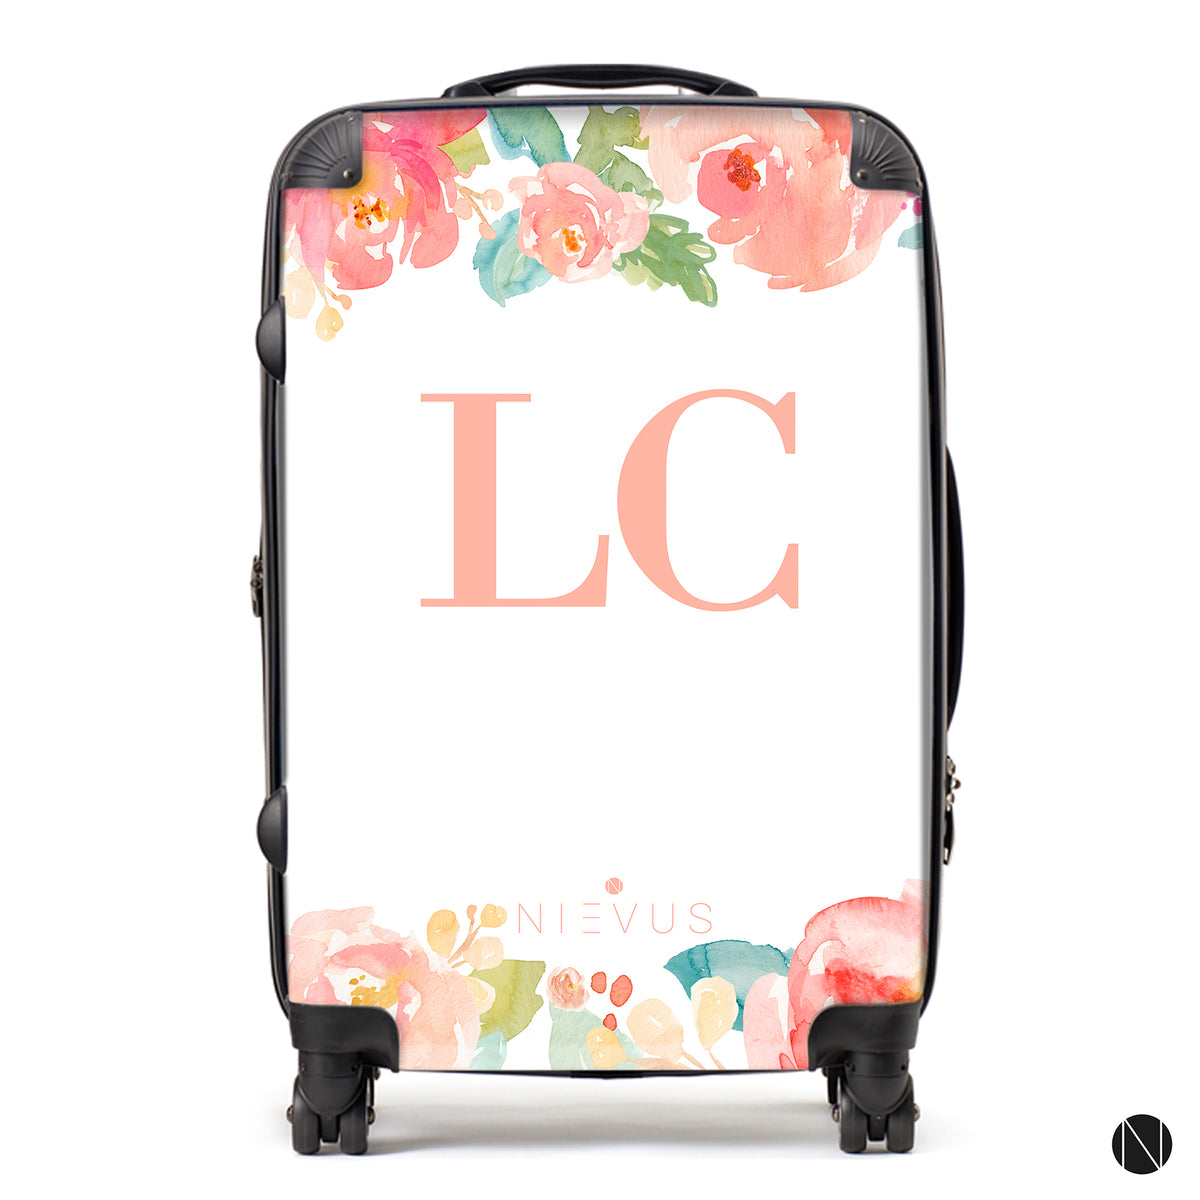 The Personalised Floral Suitcase